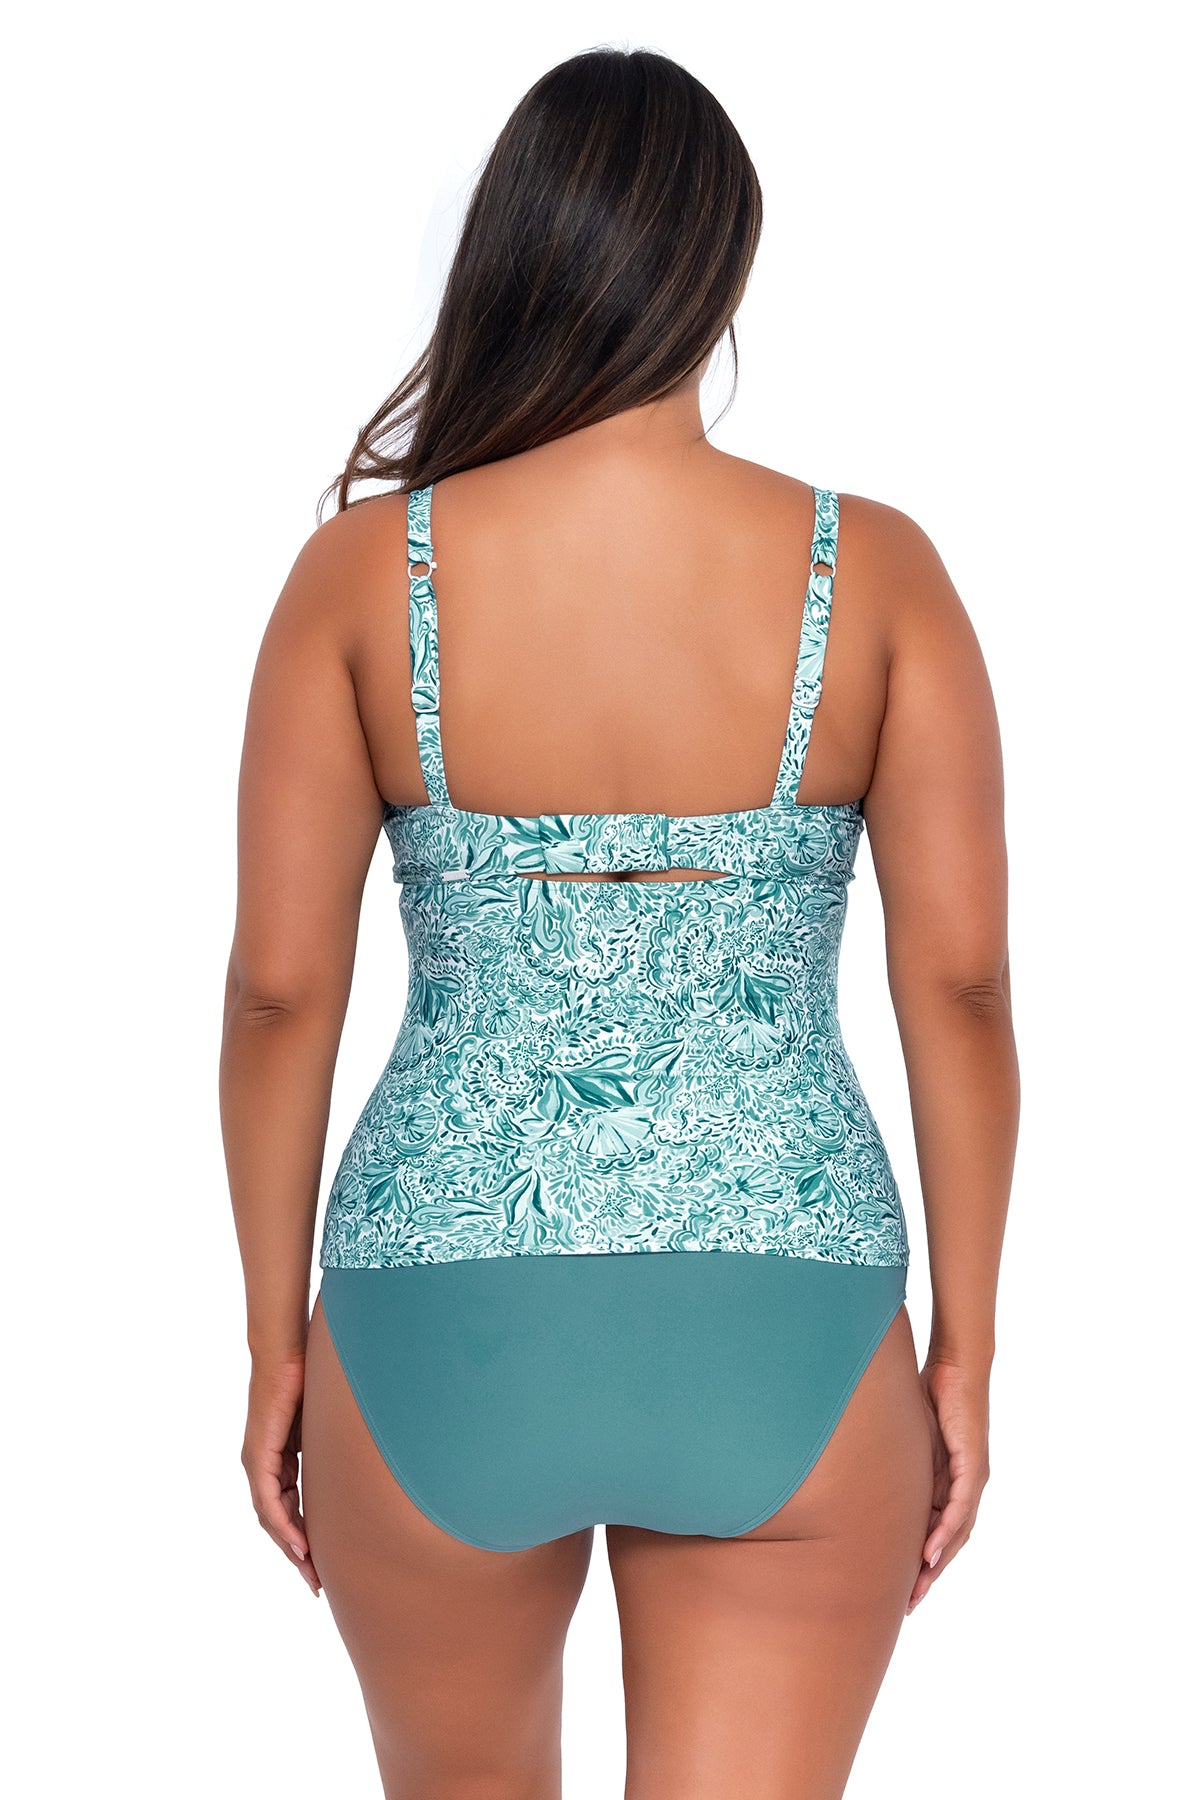 Sunsets Separates D/DD-Cup Taylor Tankini Top at Von Maur